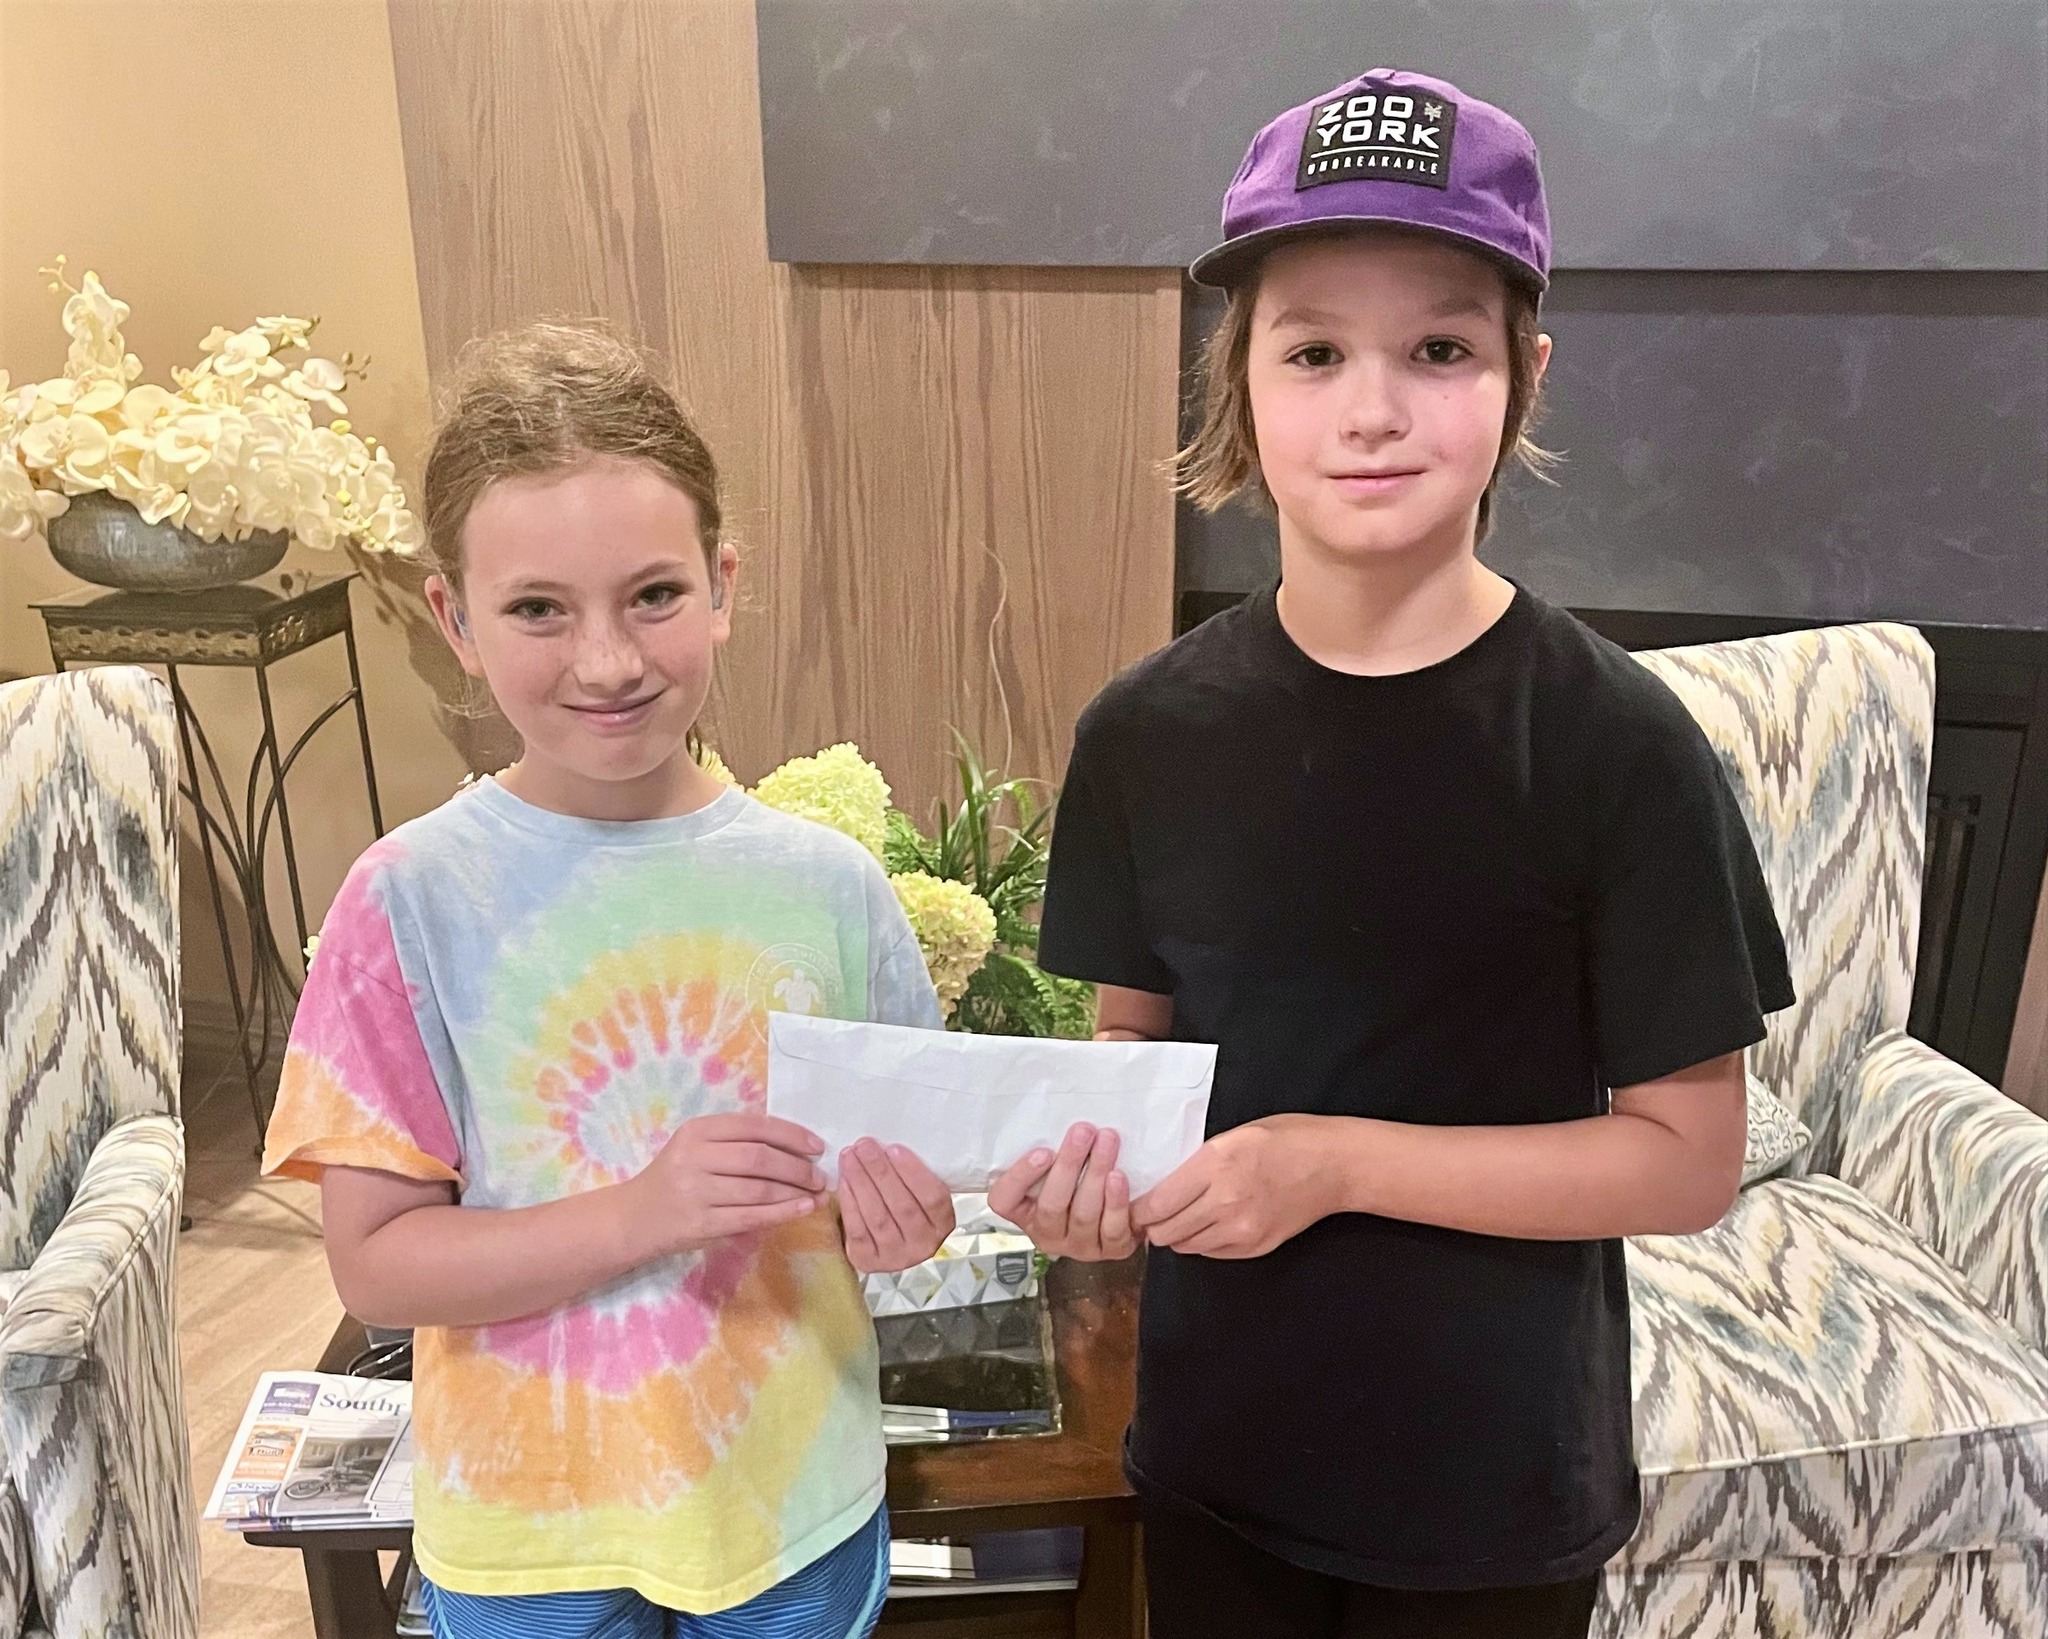 Ben and Mikayla Donate $200 to Hogs for Hospice from Selling Water During Hogs for Hospice Weekend